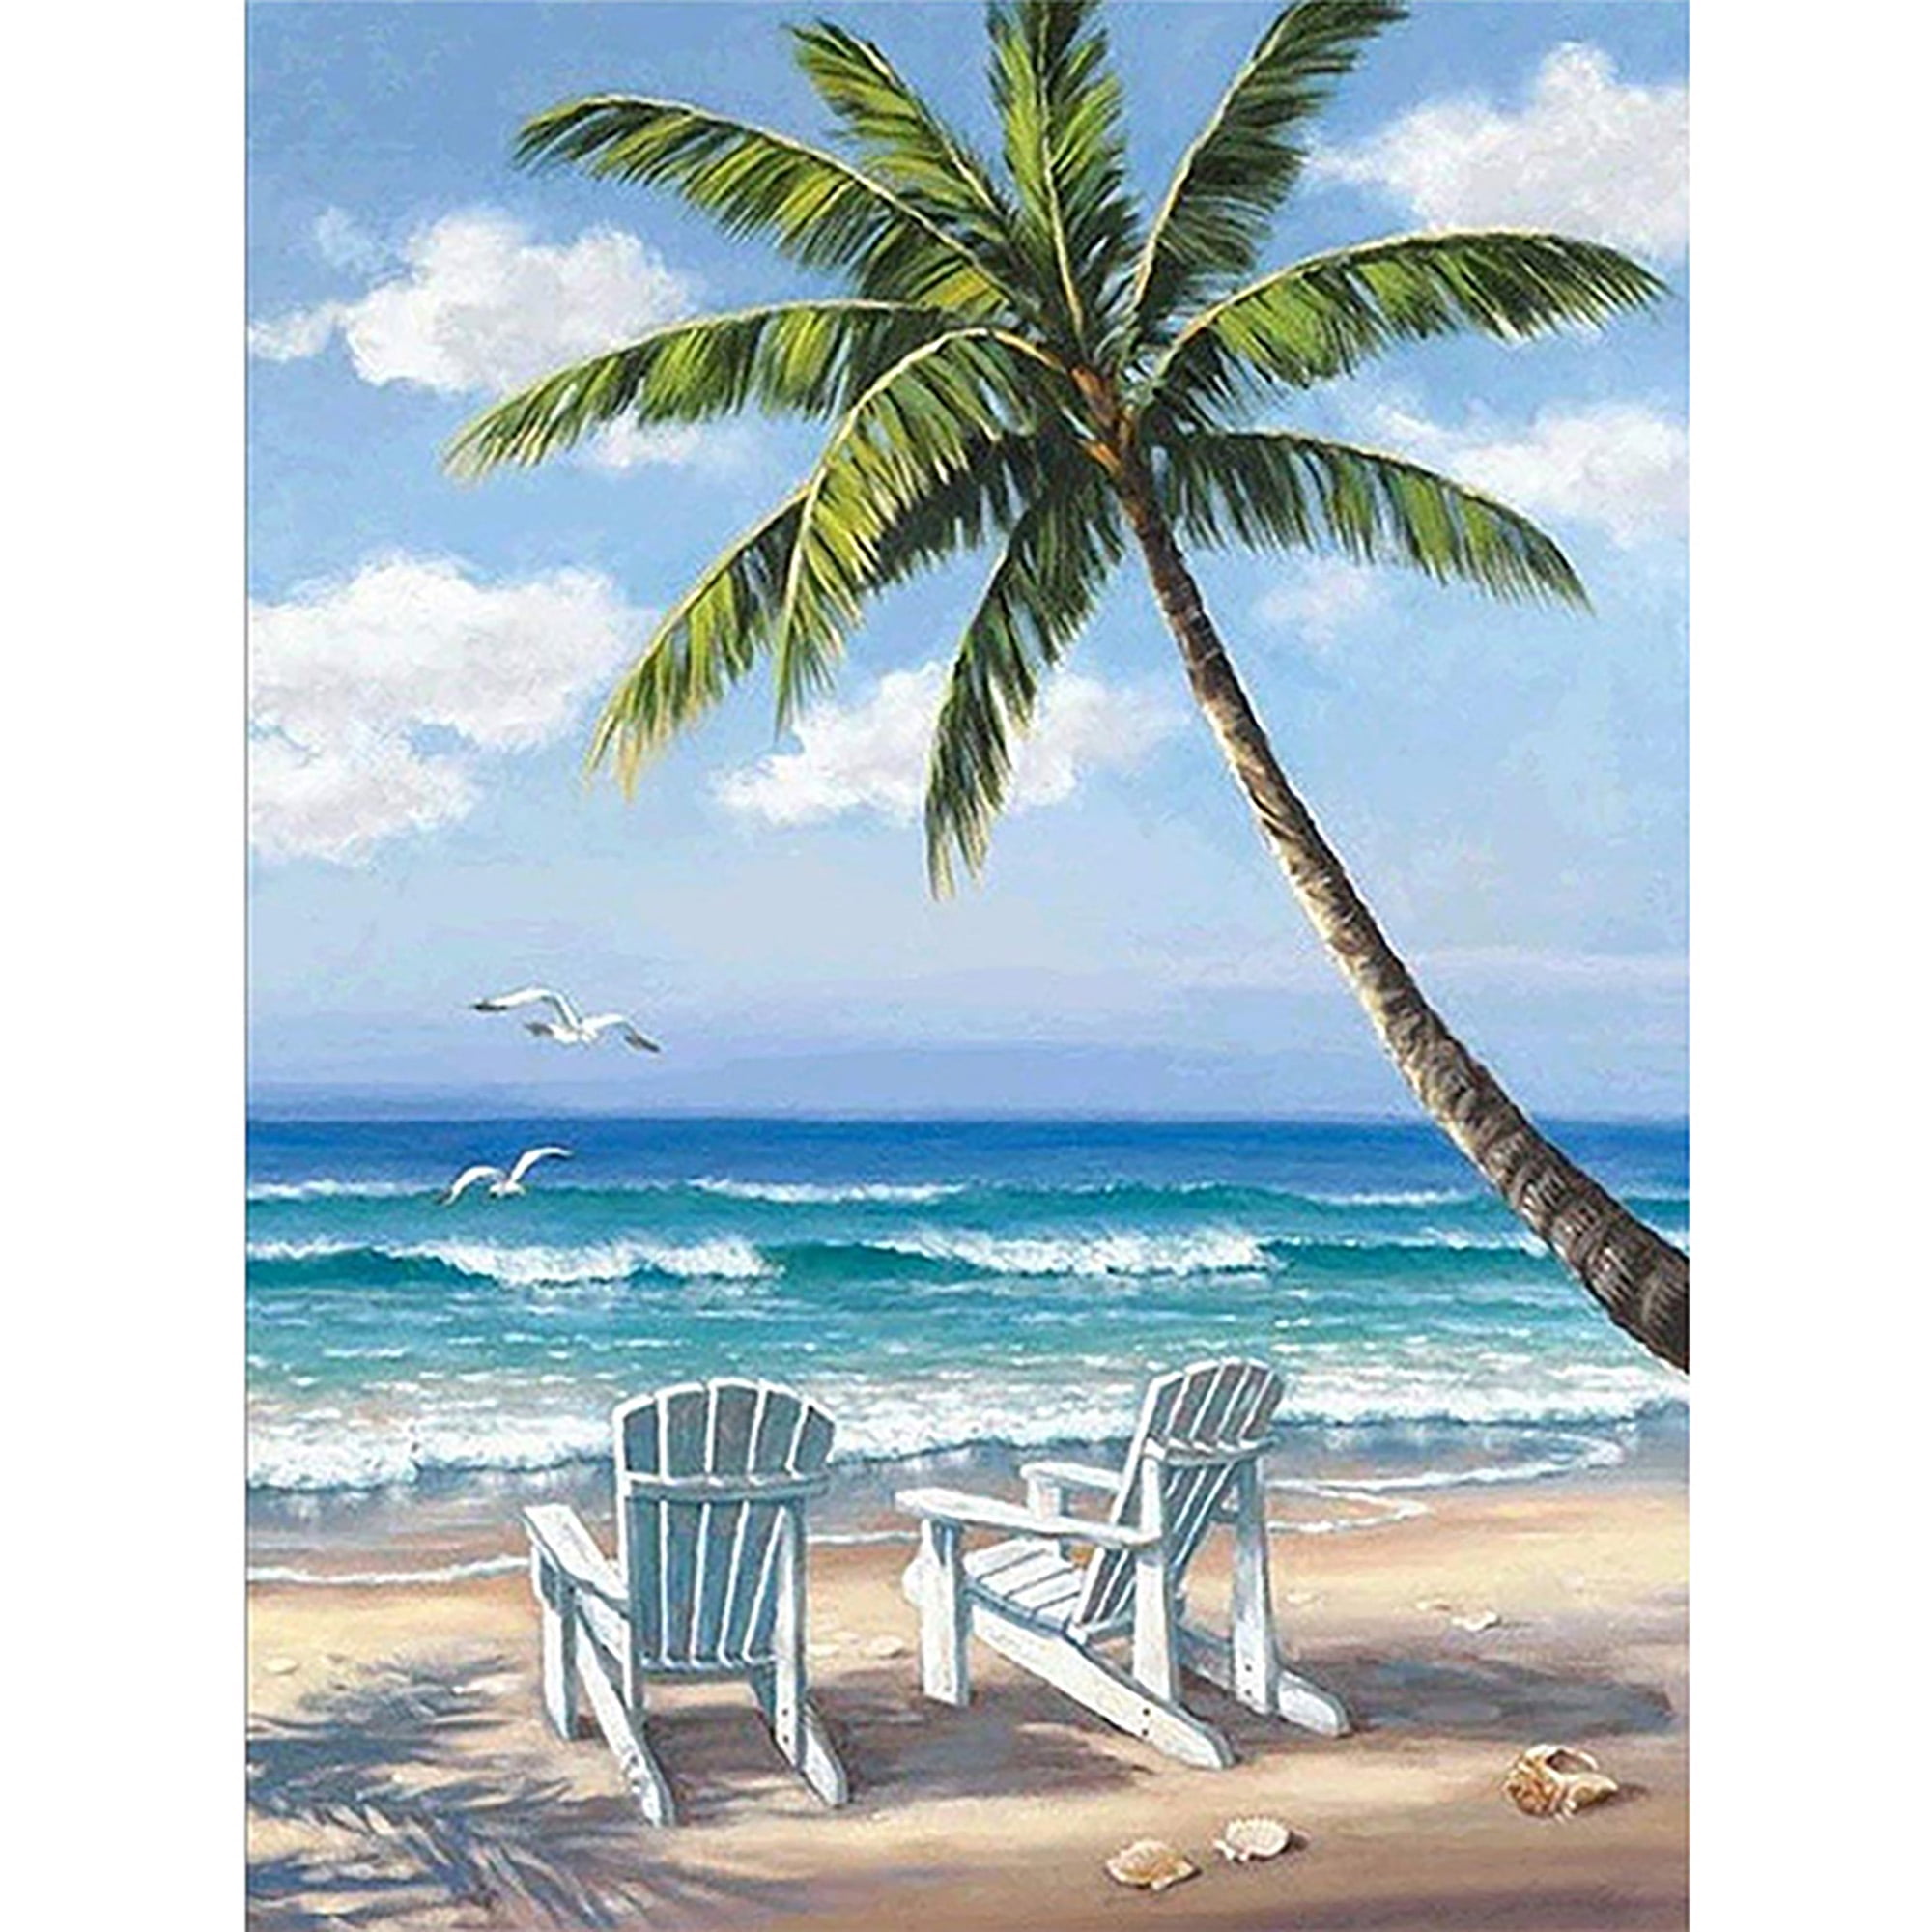 DIY 5D Diamond Painting by Number Kits,Painting Cross Stitch Full Round Drill Embroidery Pictures Arts Home Decor Beach Coconut Tree 11.8x15.7 in by UM UPMALL 